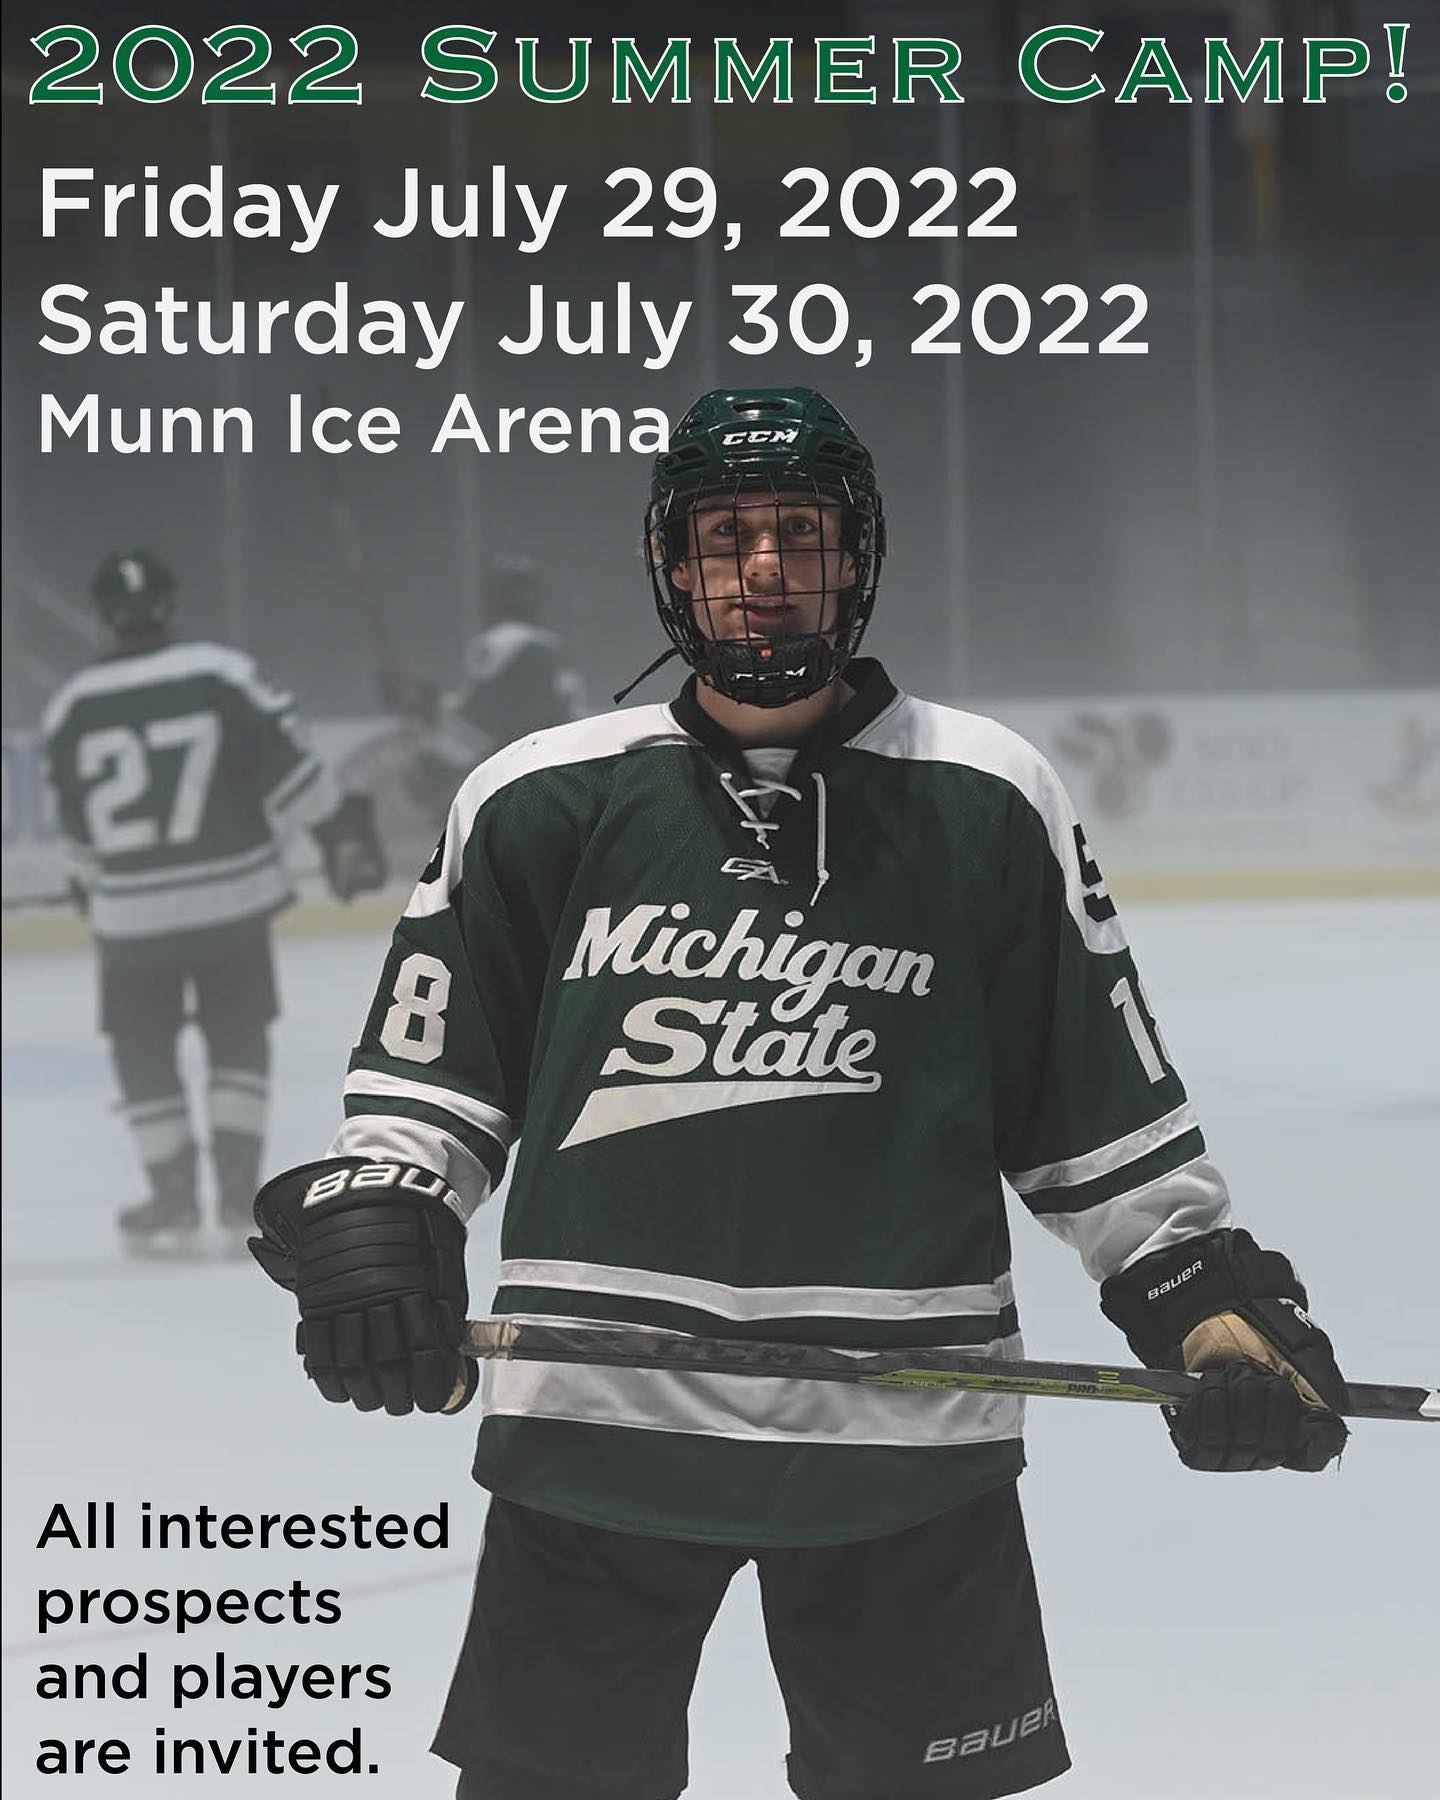 Our 2022 Summer Camp will be held July 29 & 30 at Munn Ice Arena.  All the details are on our website msuclubhockey.com. DM or email any questions!